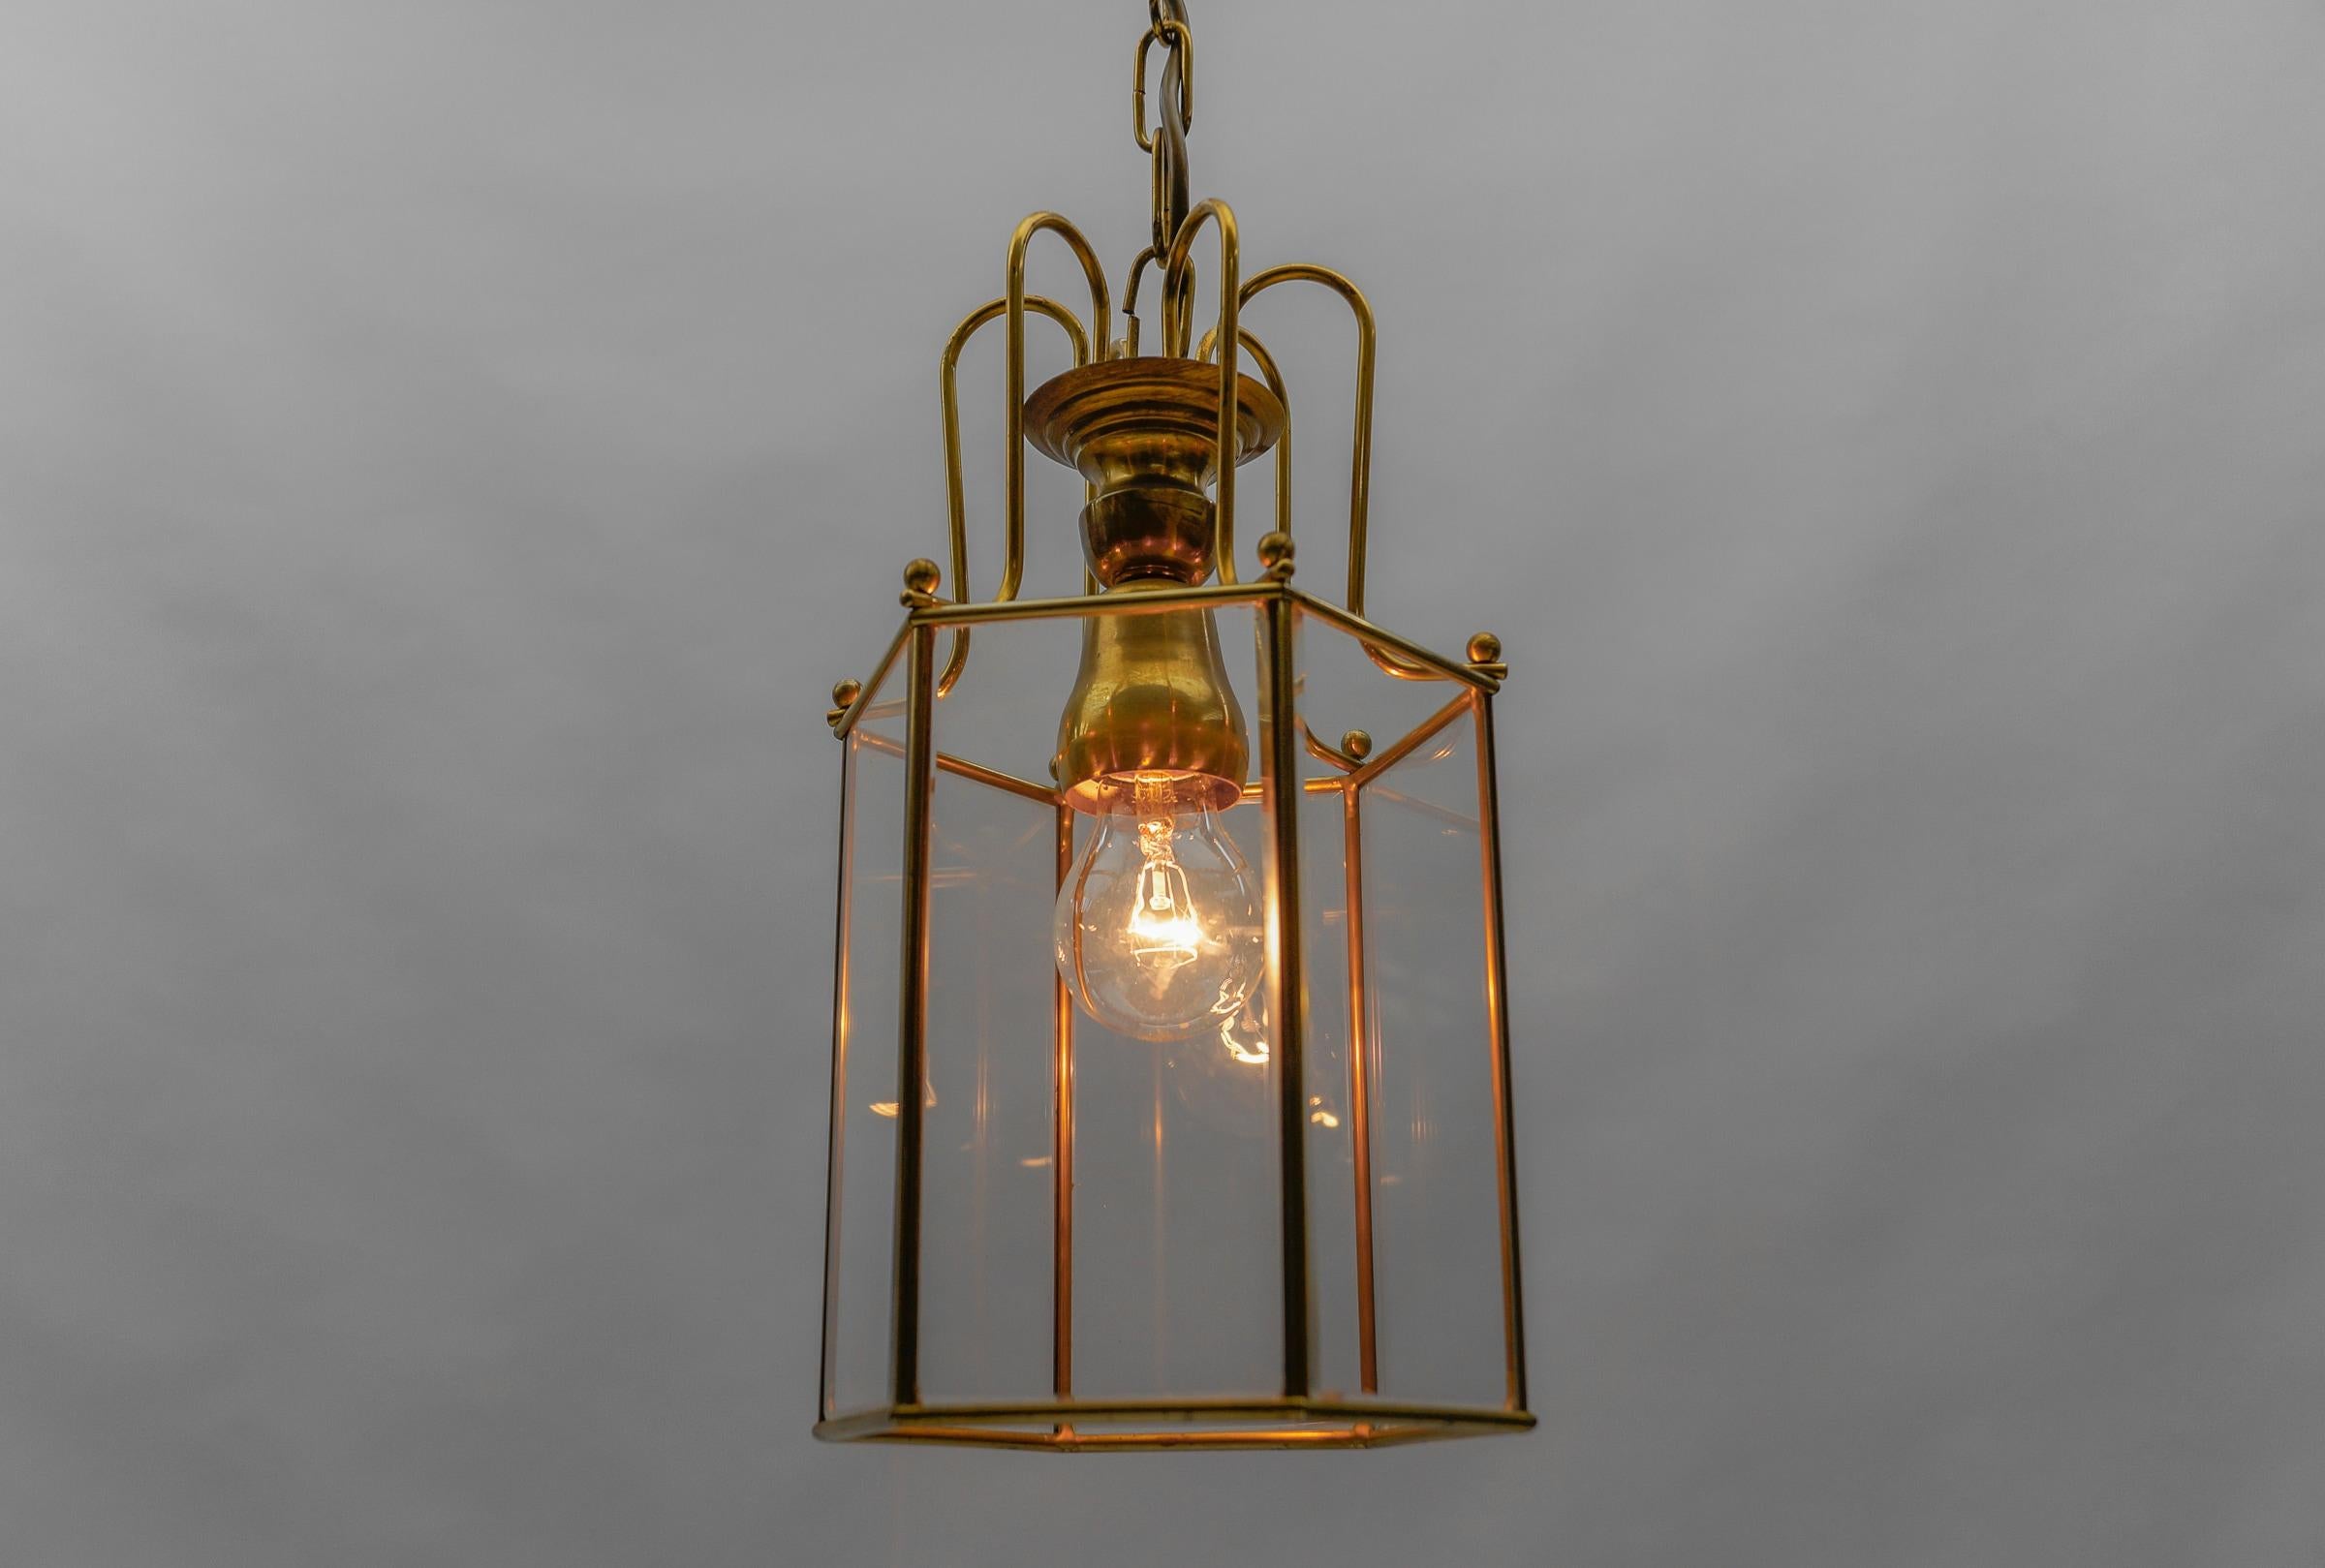 Art Deco Cut Glass Pendant Lamp in Brass, 1940s / 1950s In Good Condition For Sale In Nürnberg, Bayern